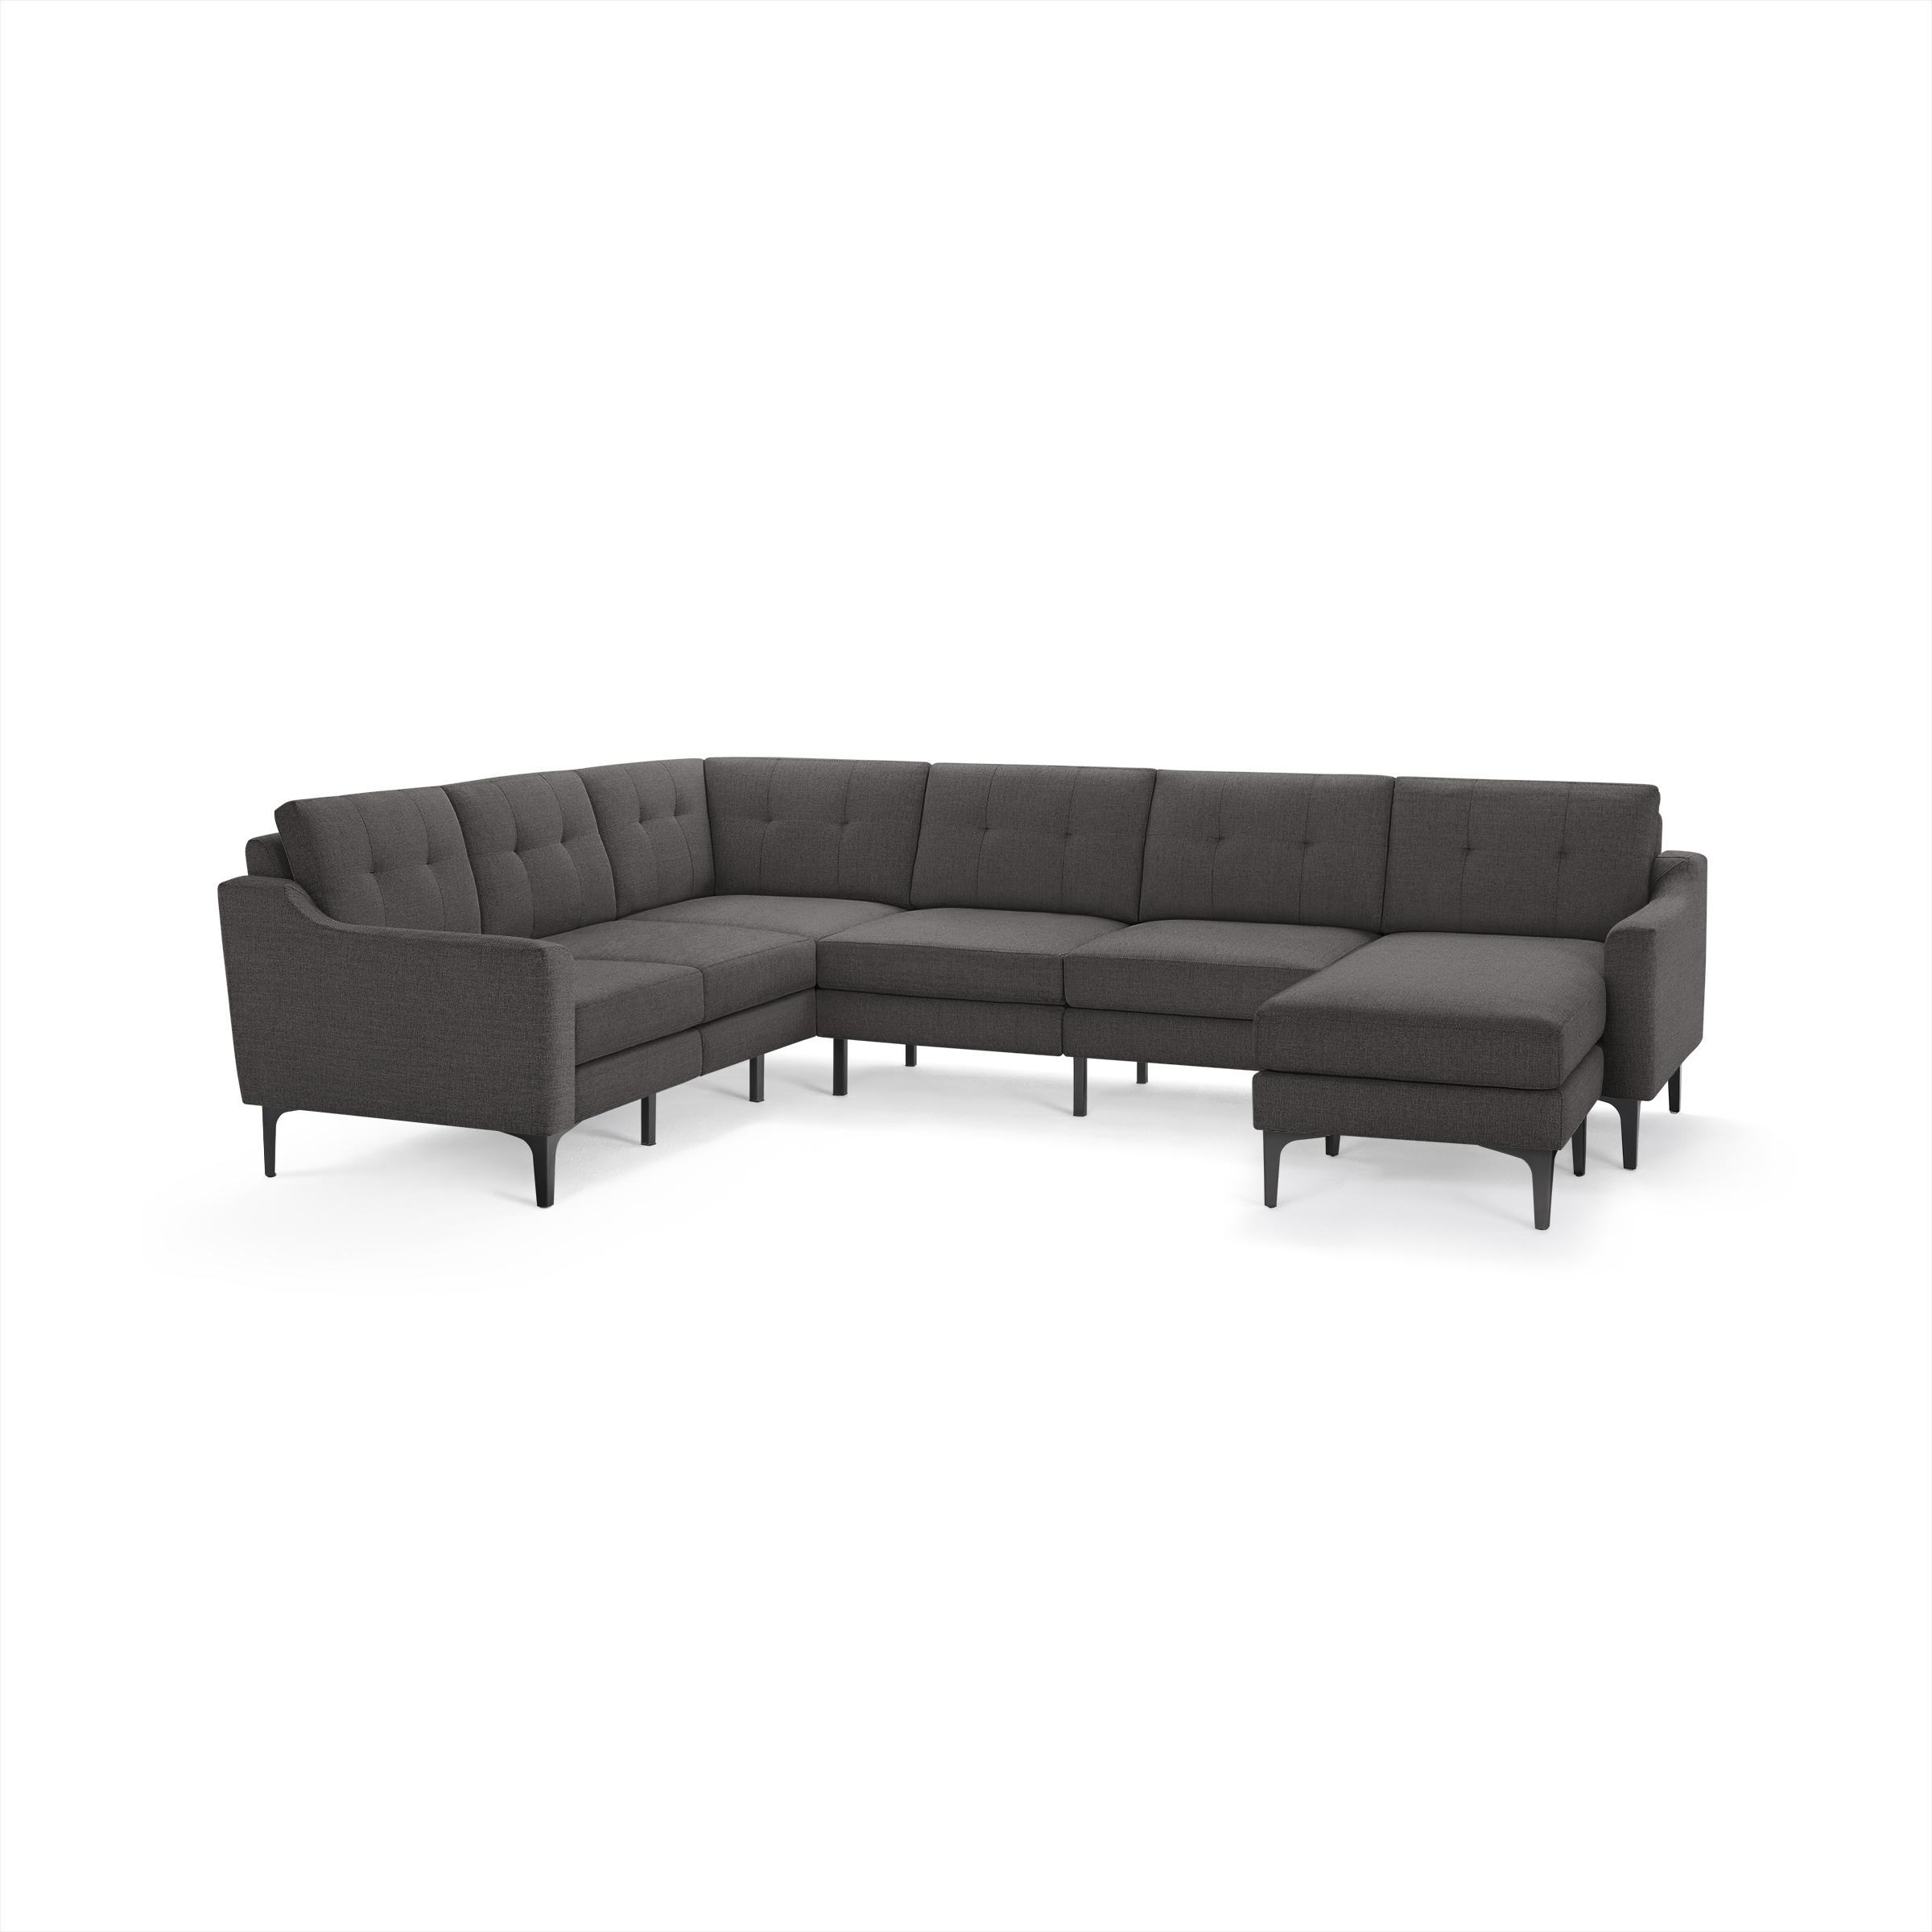 Nomad 6-Seat Corner Sectional with Chaise in Charcoal - Image 0